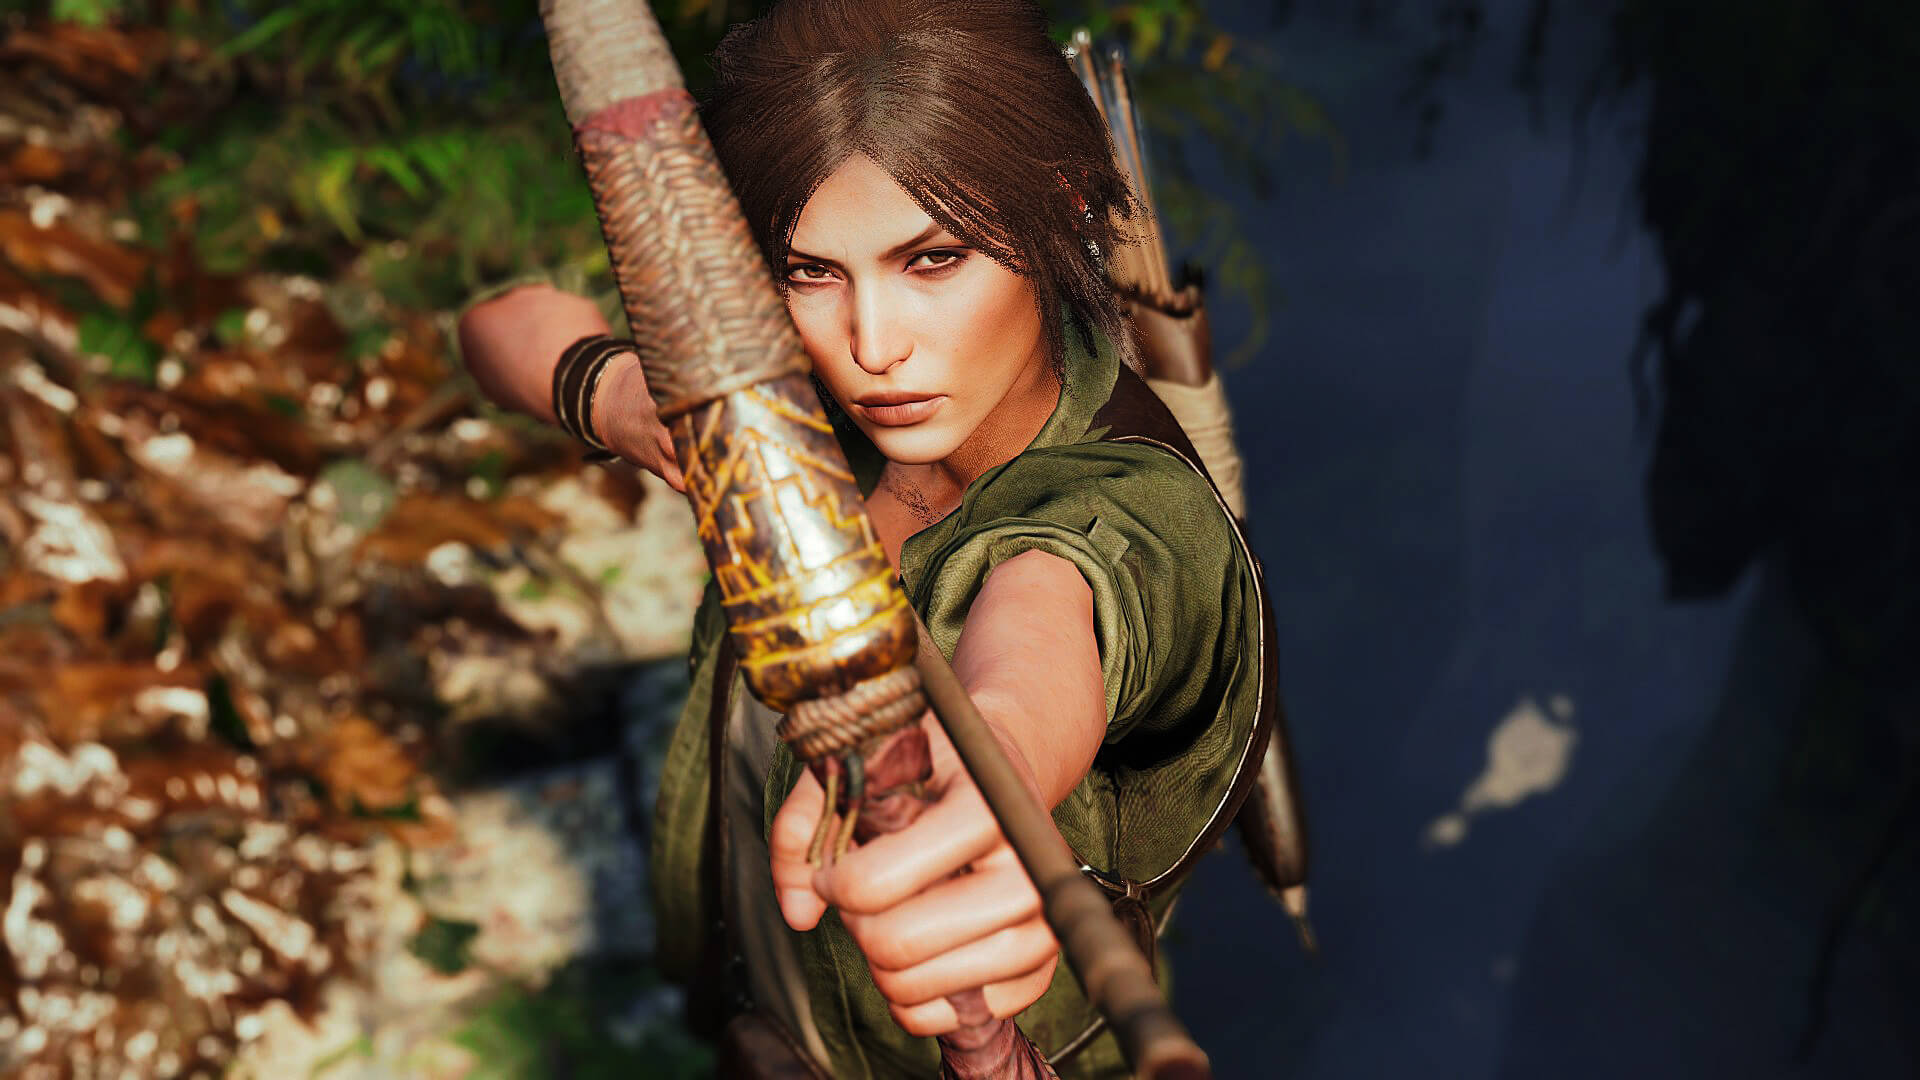 New Shadow Of The Tomb Raider Mod Replaces Lara S Face With One Closer To The Original Version